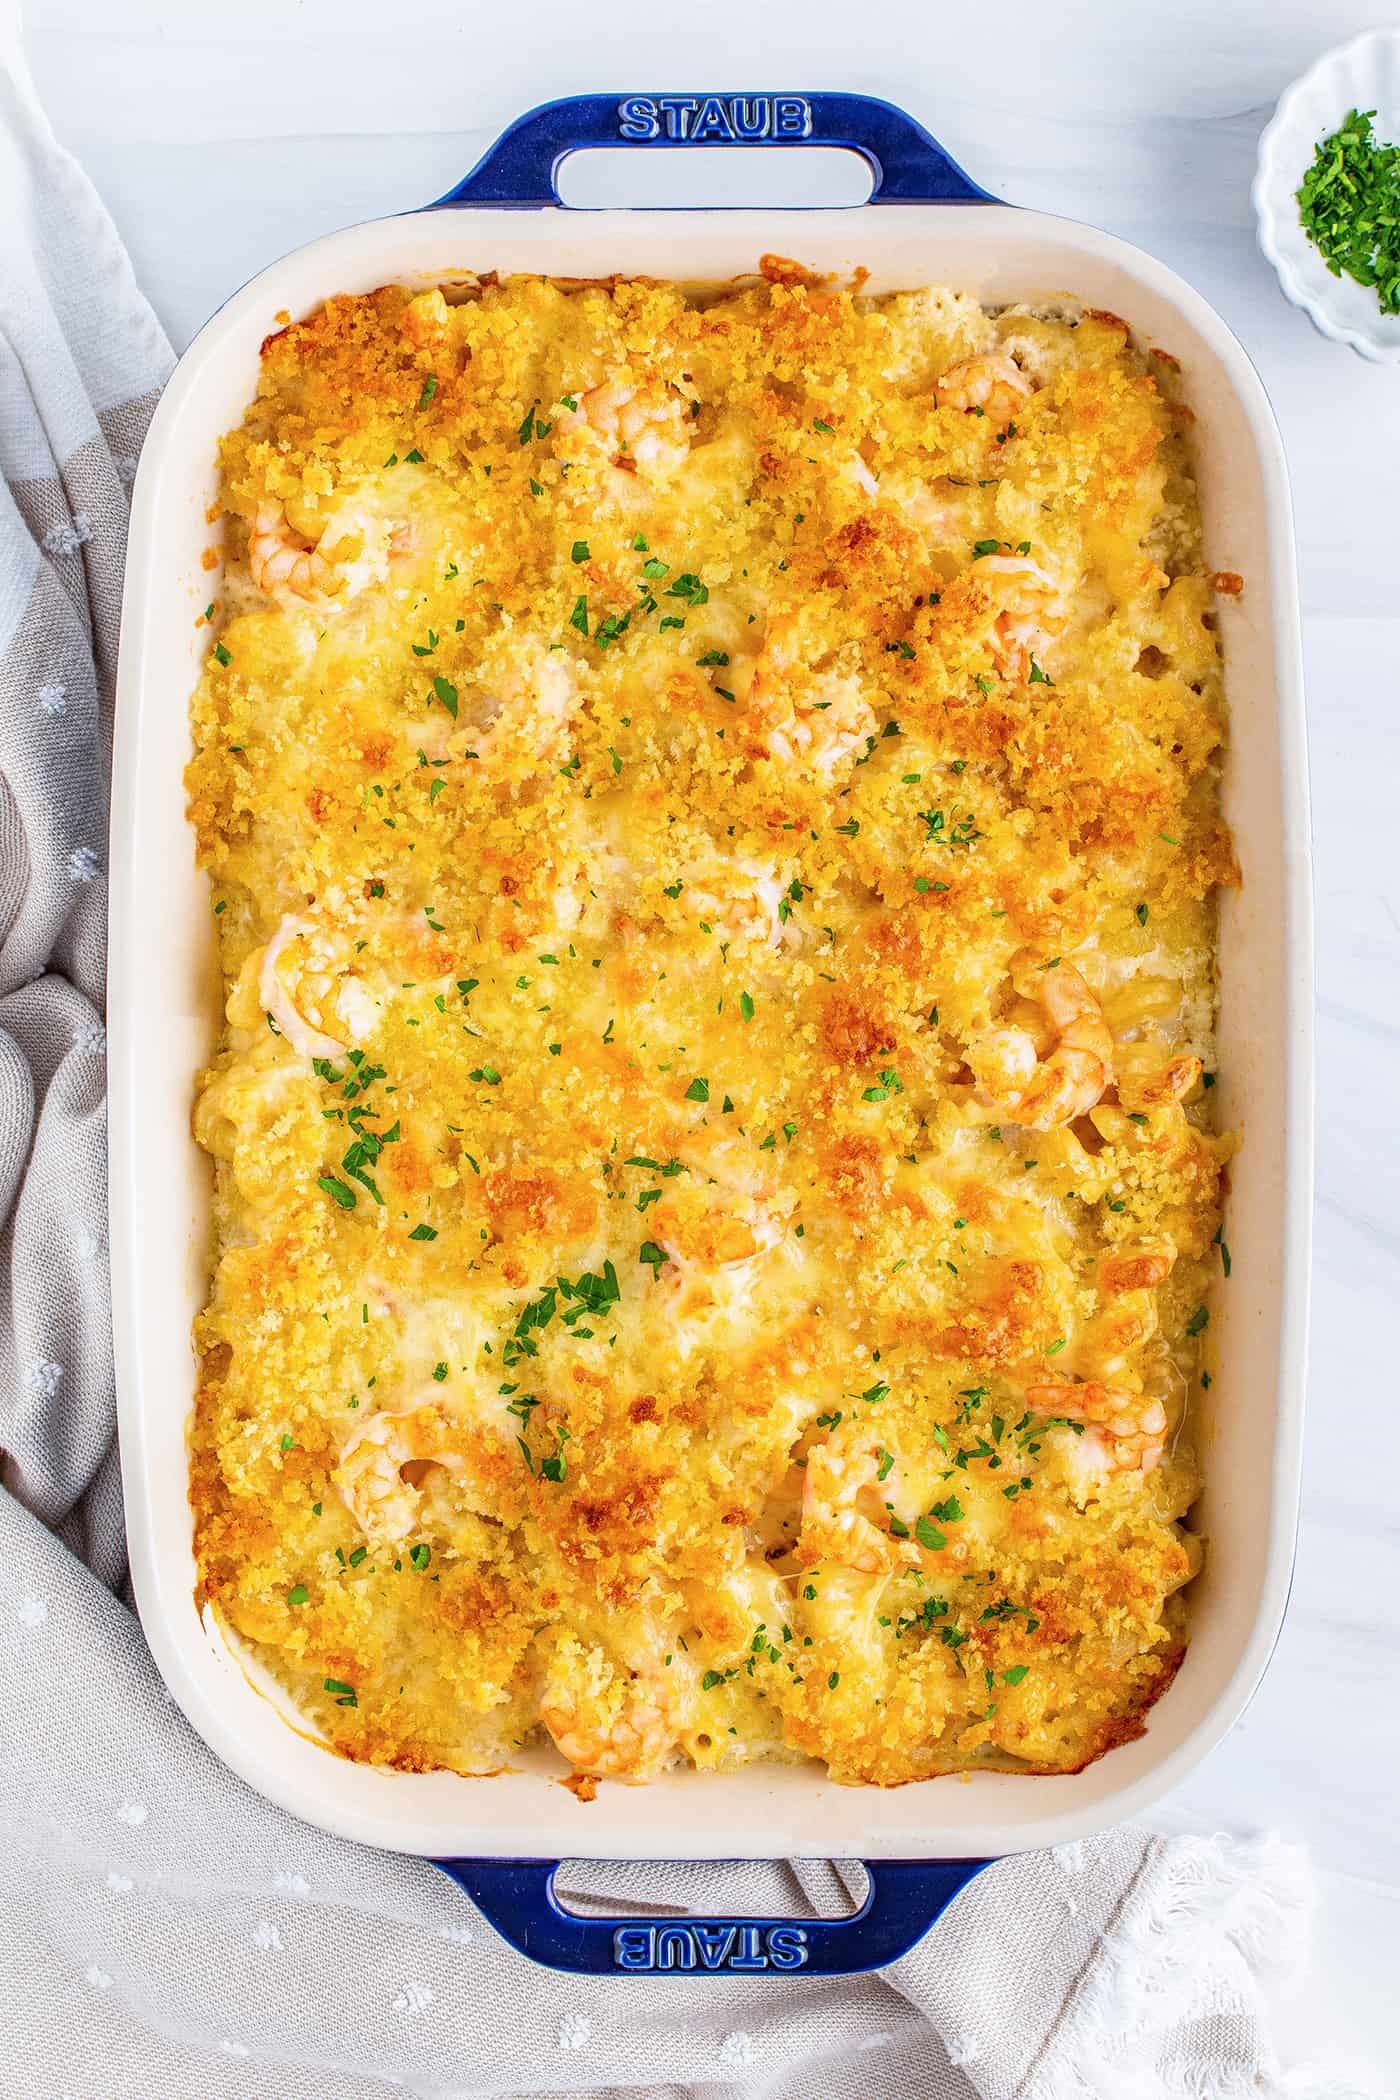 baked macaroni and cheese with shrimp and breadcrumb topping, in a blue 9" x 13" baking dish